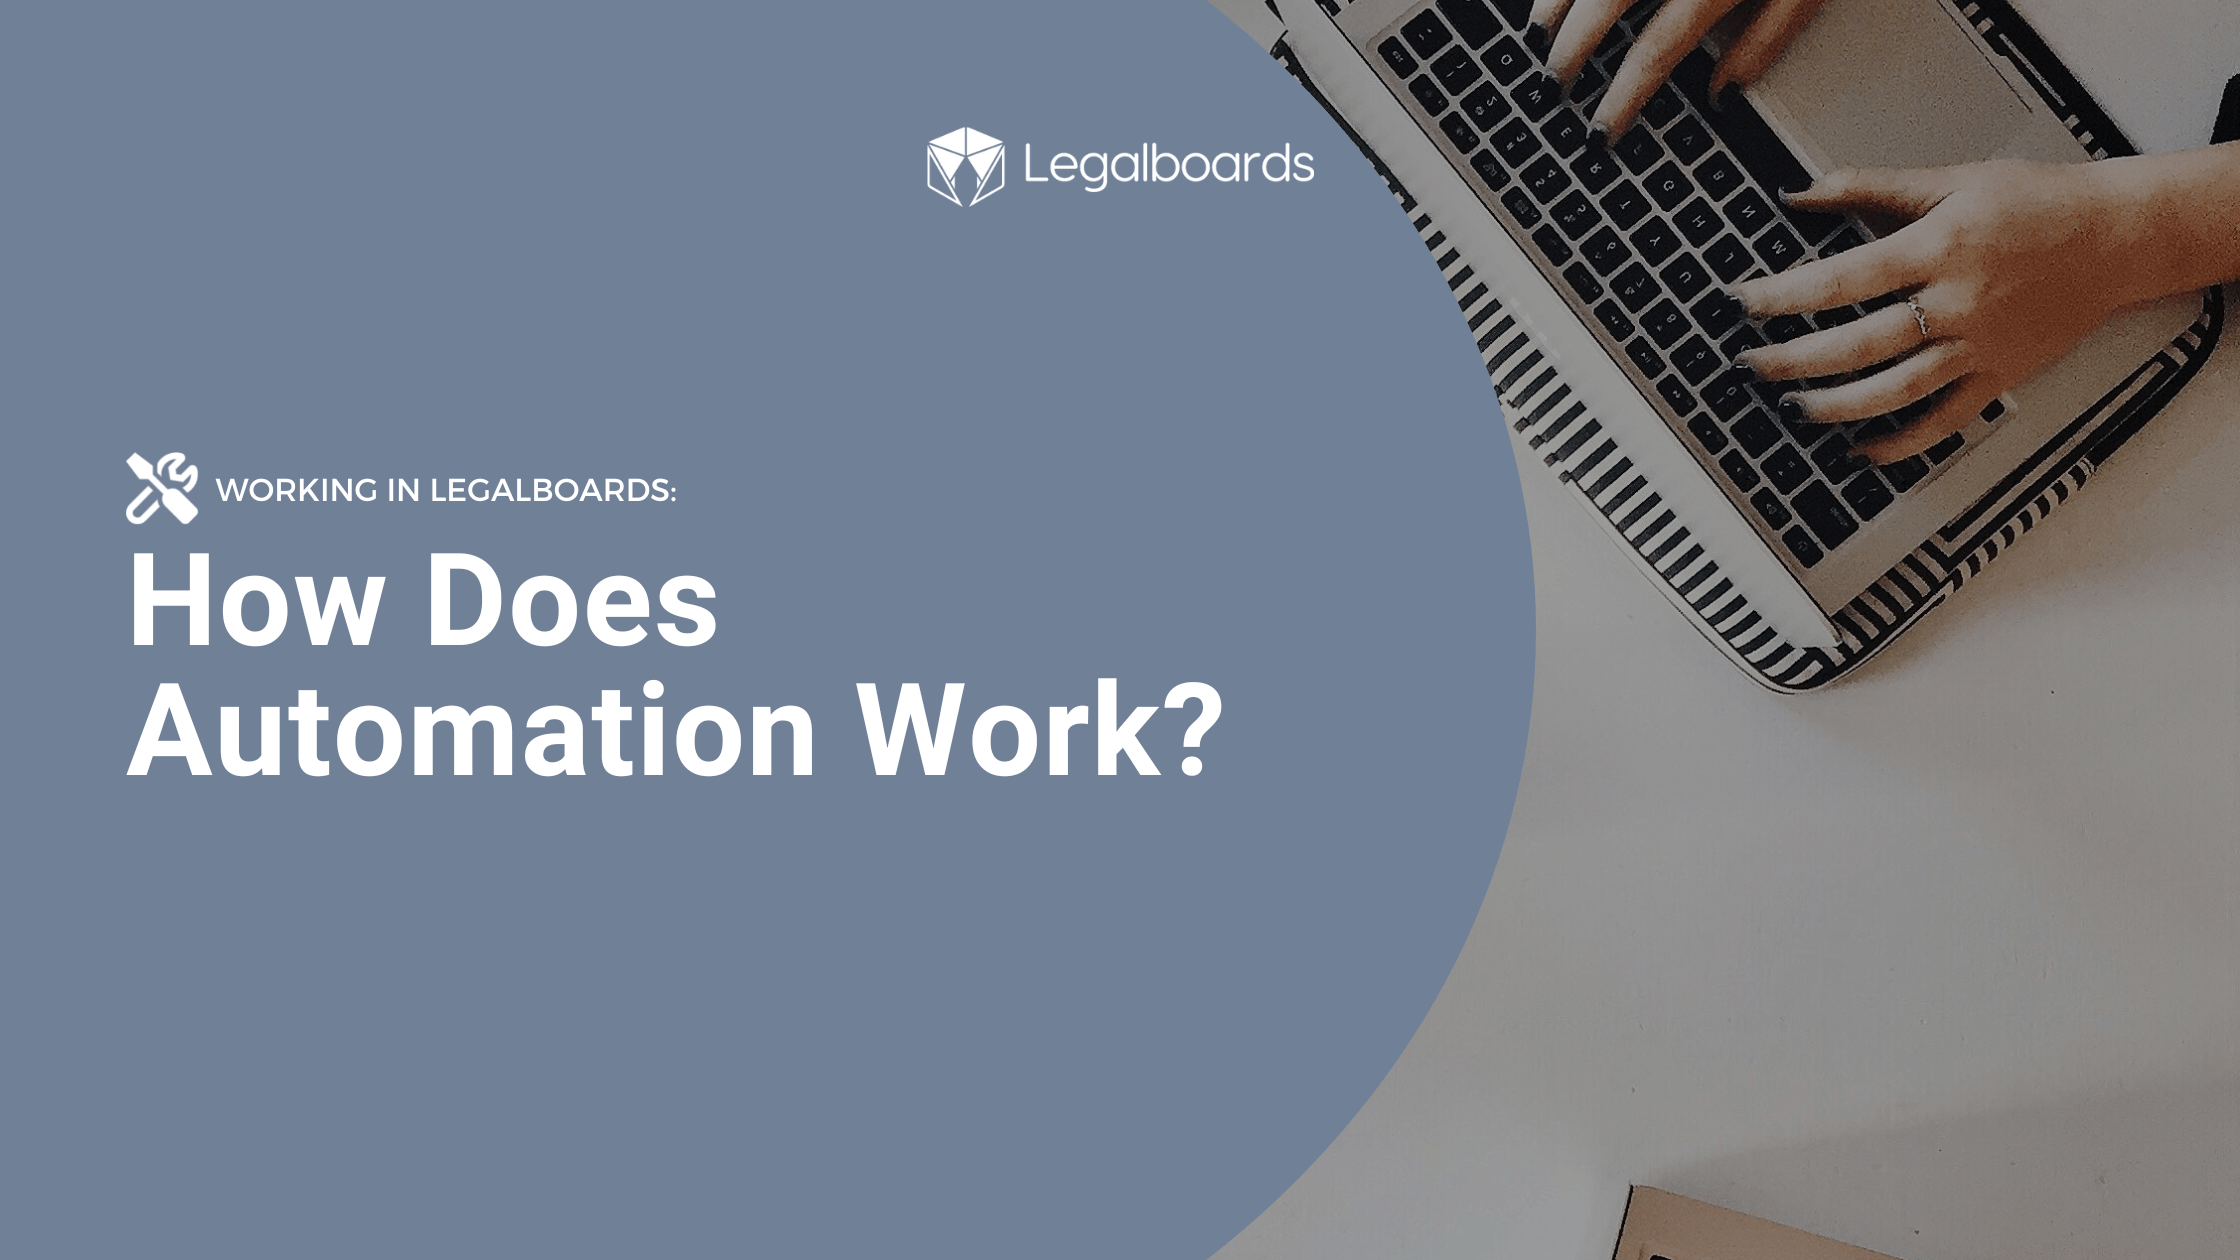 Working in Legalboards: How Does Automation Work?